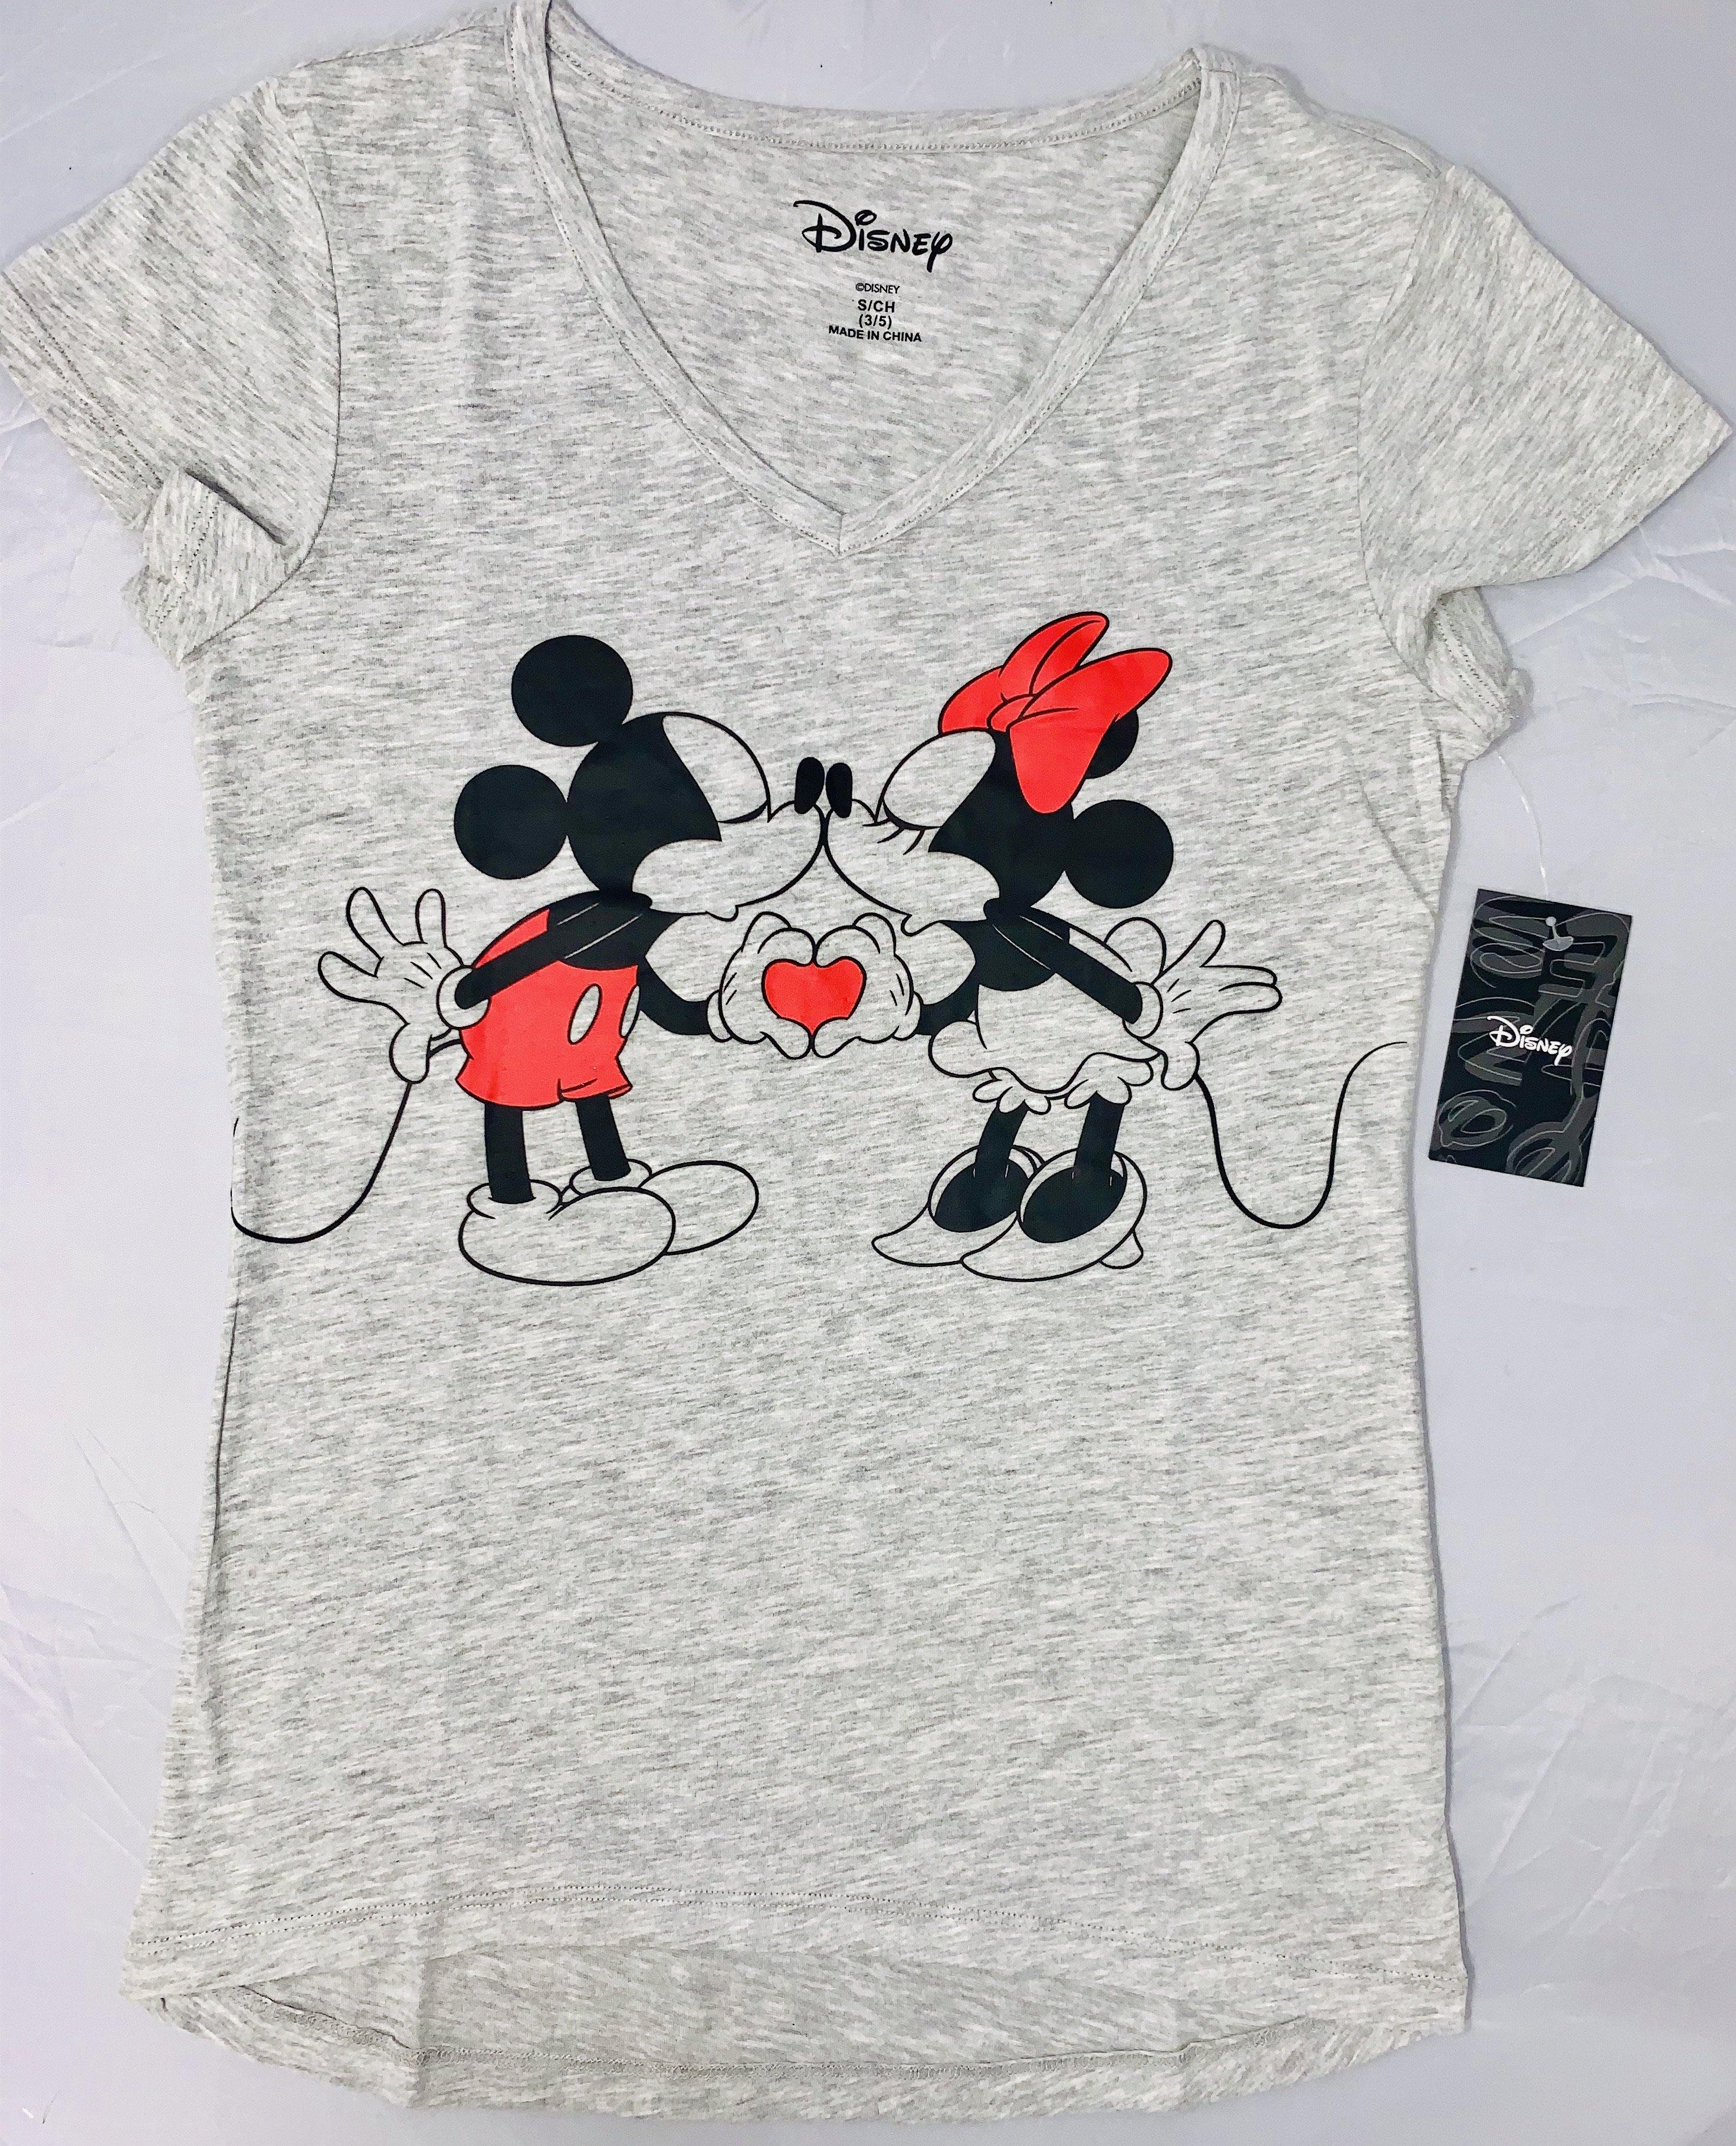 minnie mouse shirts for juniors